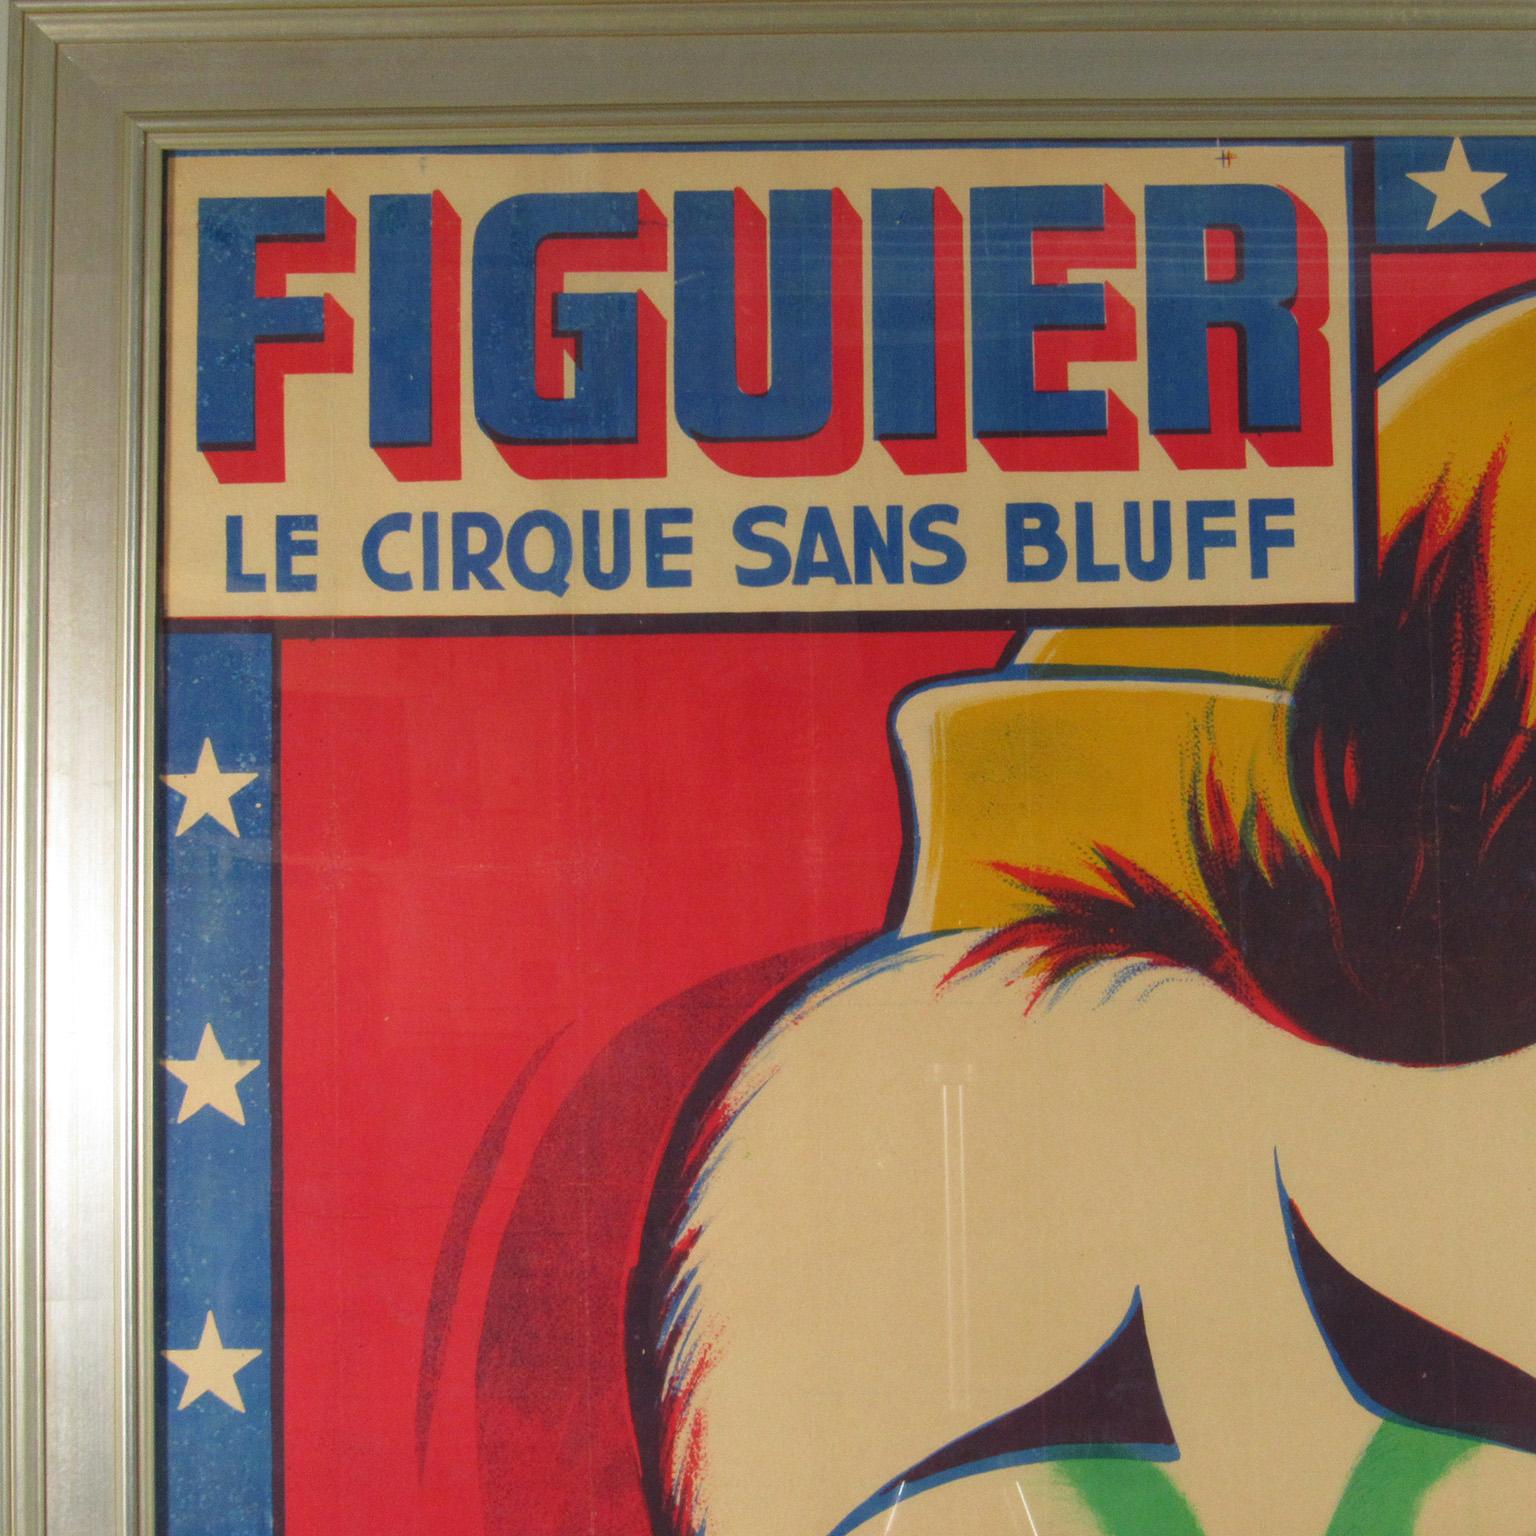 Figuier le Cirque Sans bluff midcentury French poster. Imp. Soudant, 20 Rue St. Laurent, Paris. Full size color lithograph, sight: 62 x 45 1/4 in., framed: 68 3/4 x 52 in. 

Figuier le Cirque (circus without tears) promised real acts without hype.